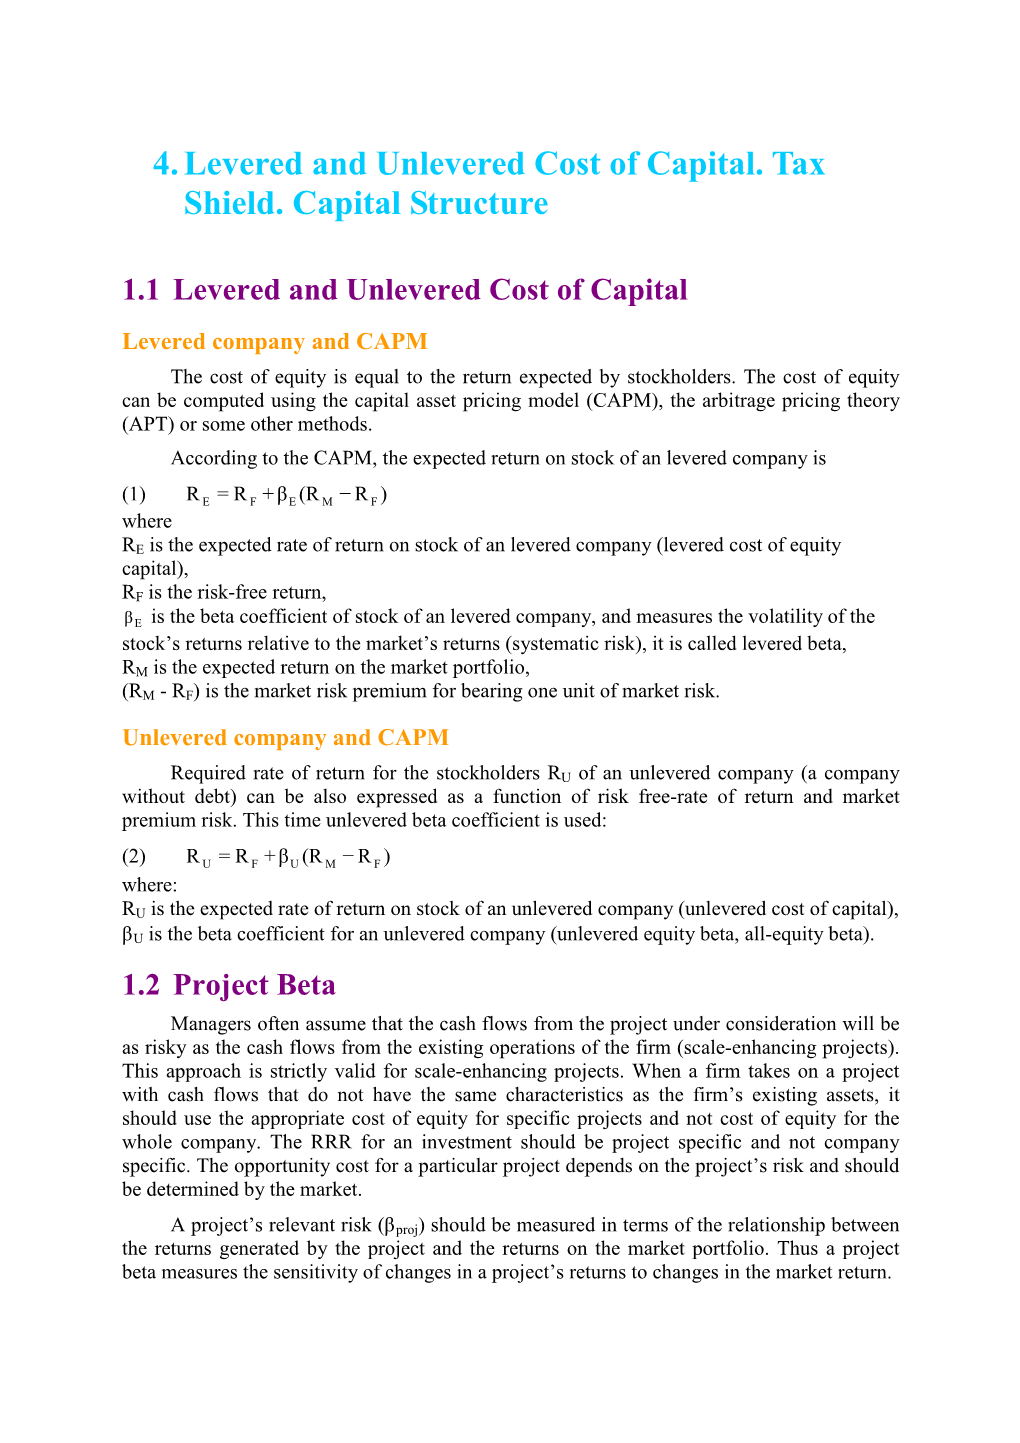 4. Levered and Unlevered Cost of Capital. Tax Shield. Capital Structure